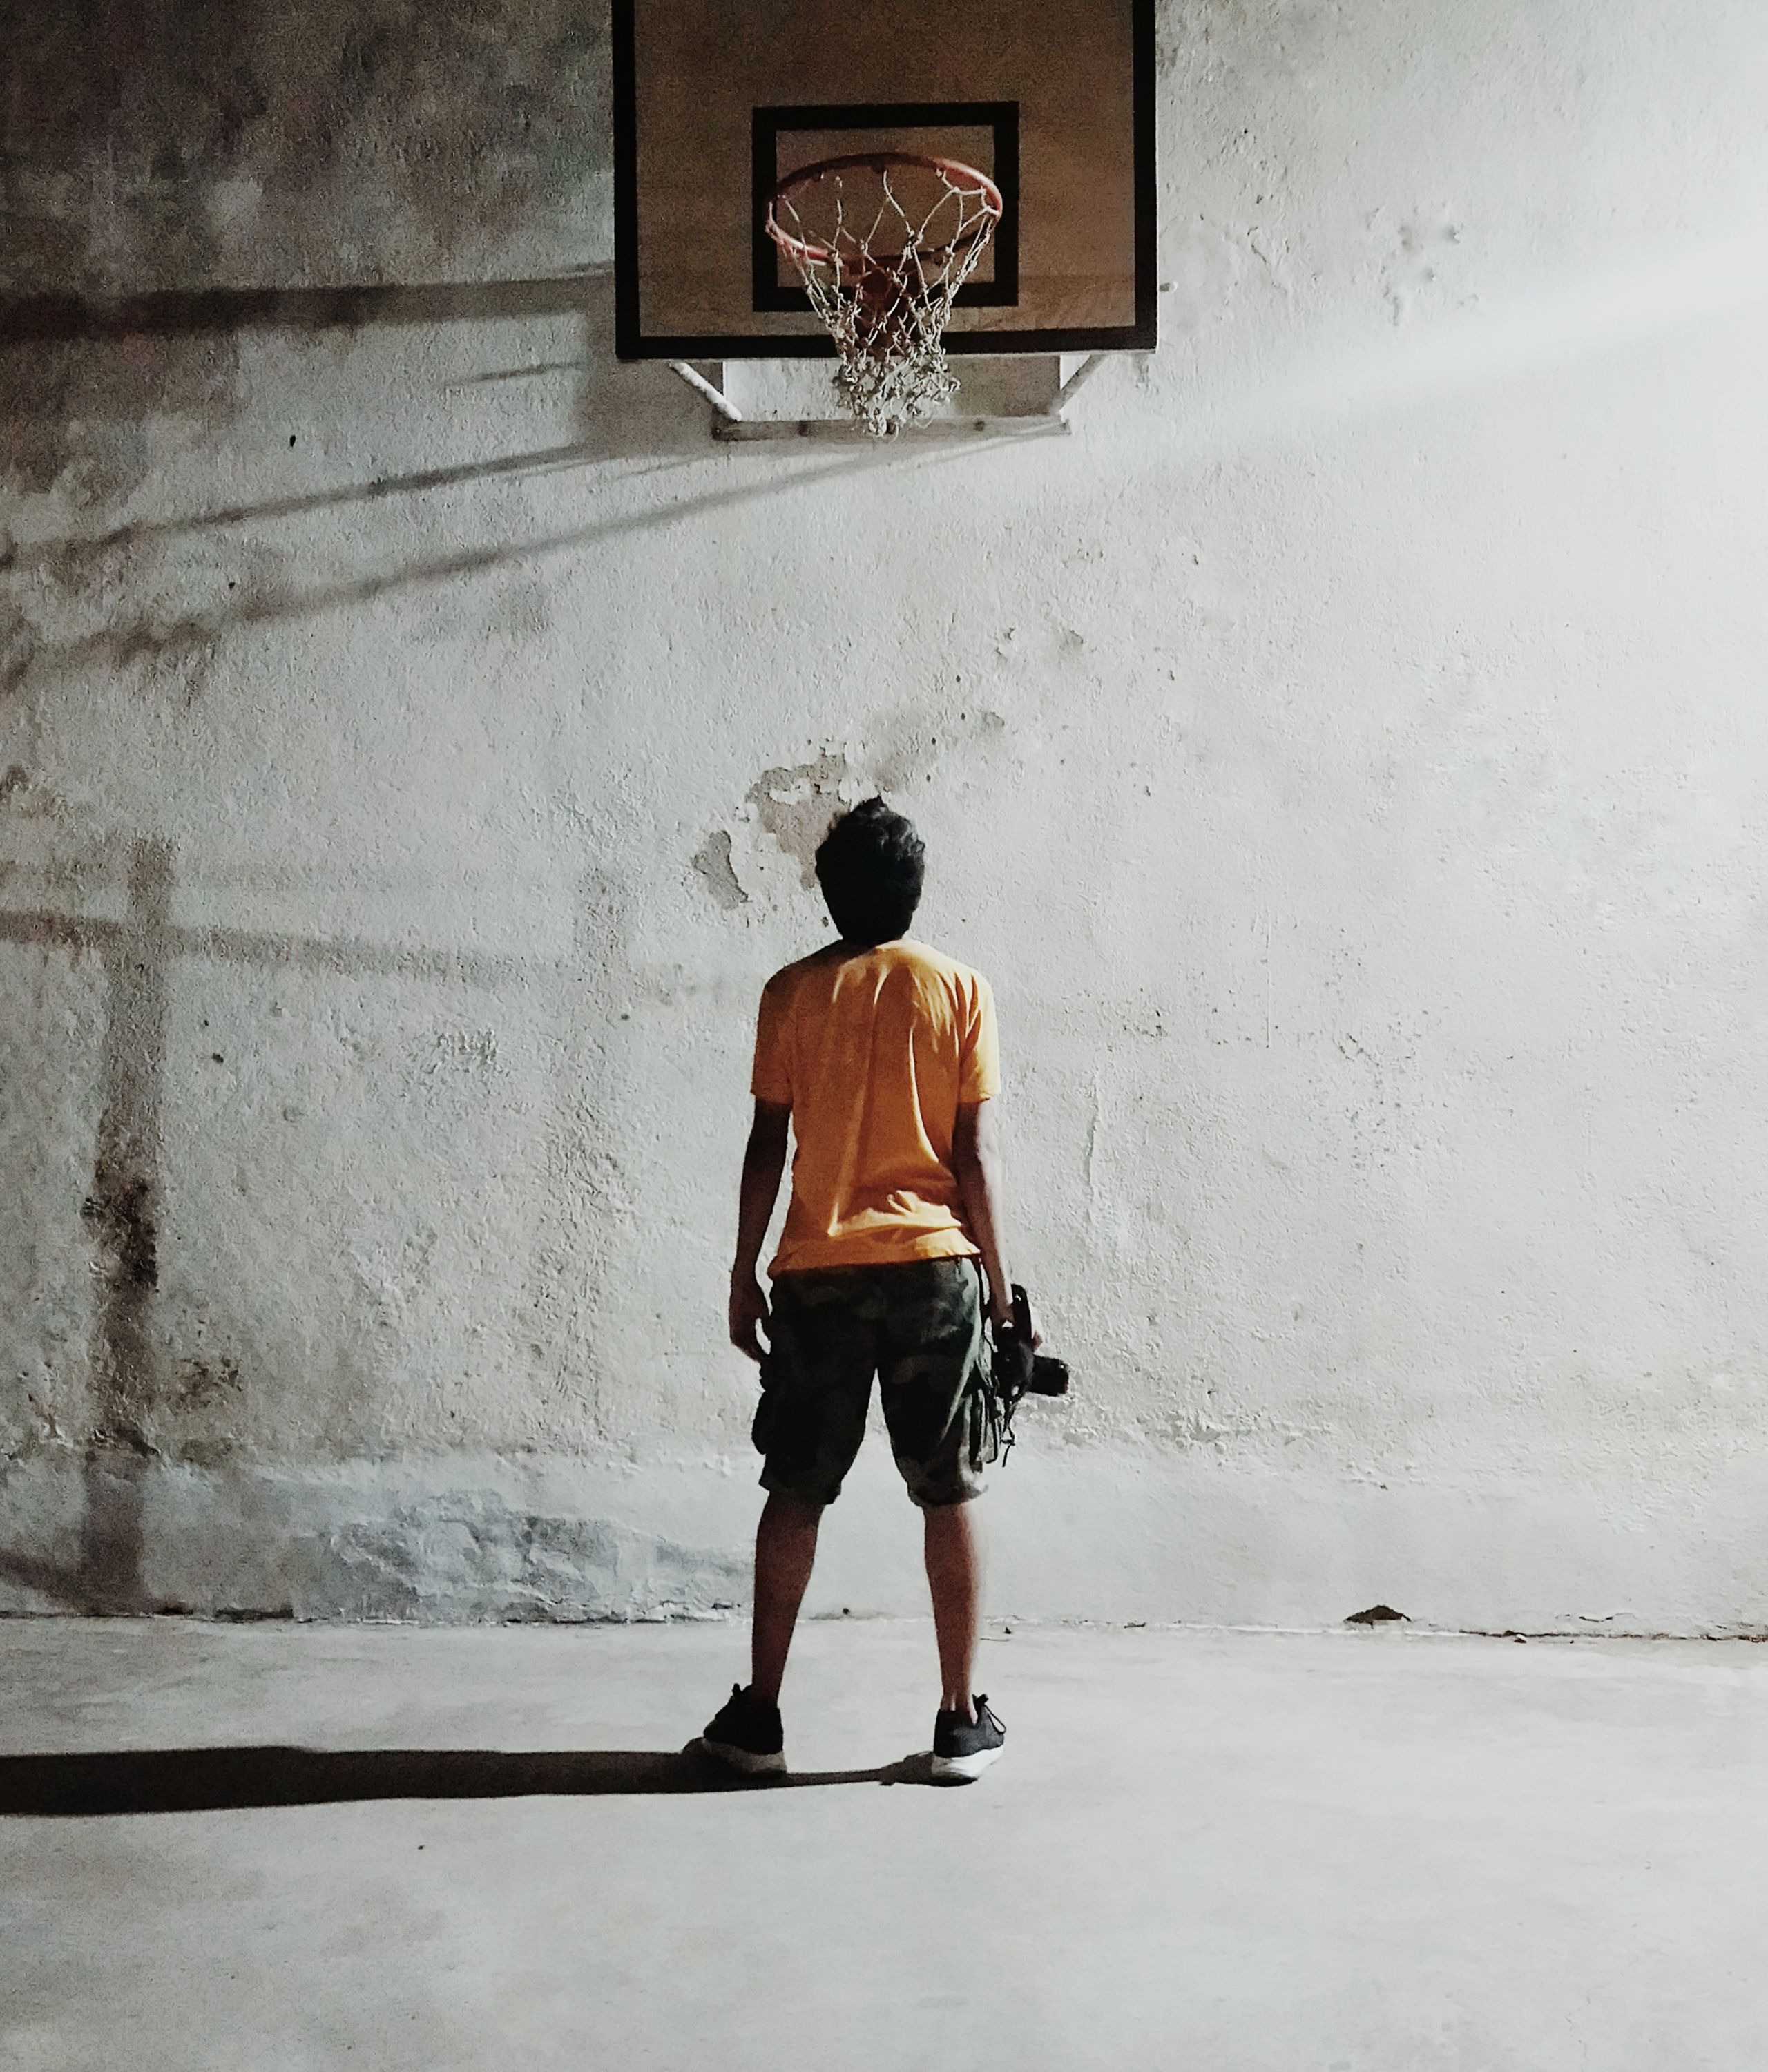 Photo Boy standing in front of a Basketball court